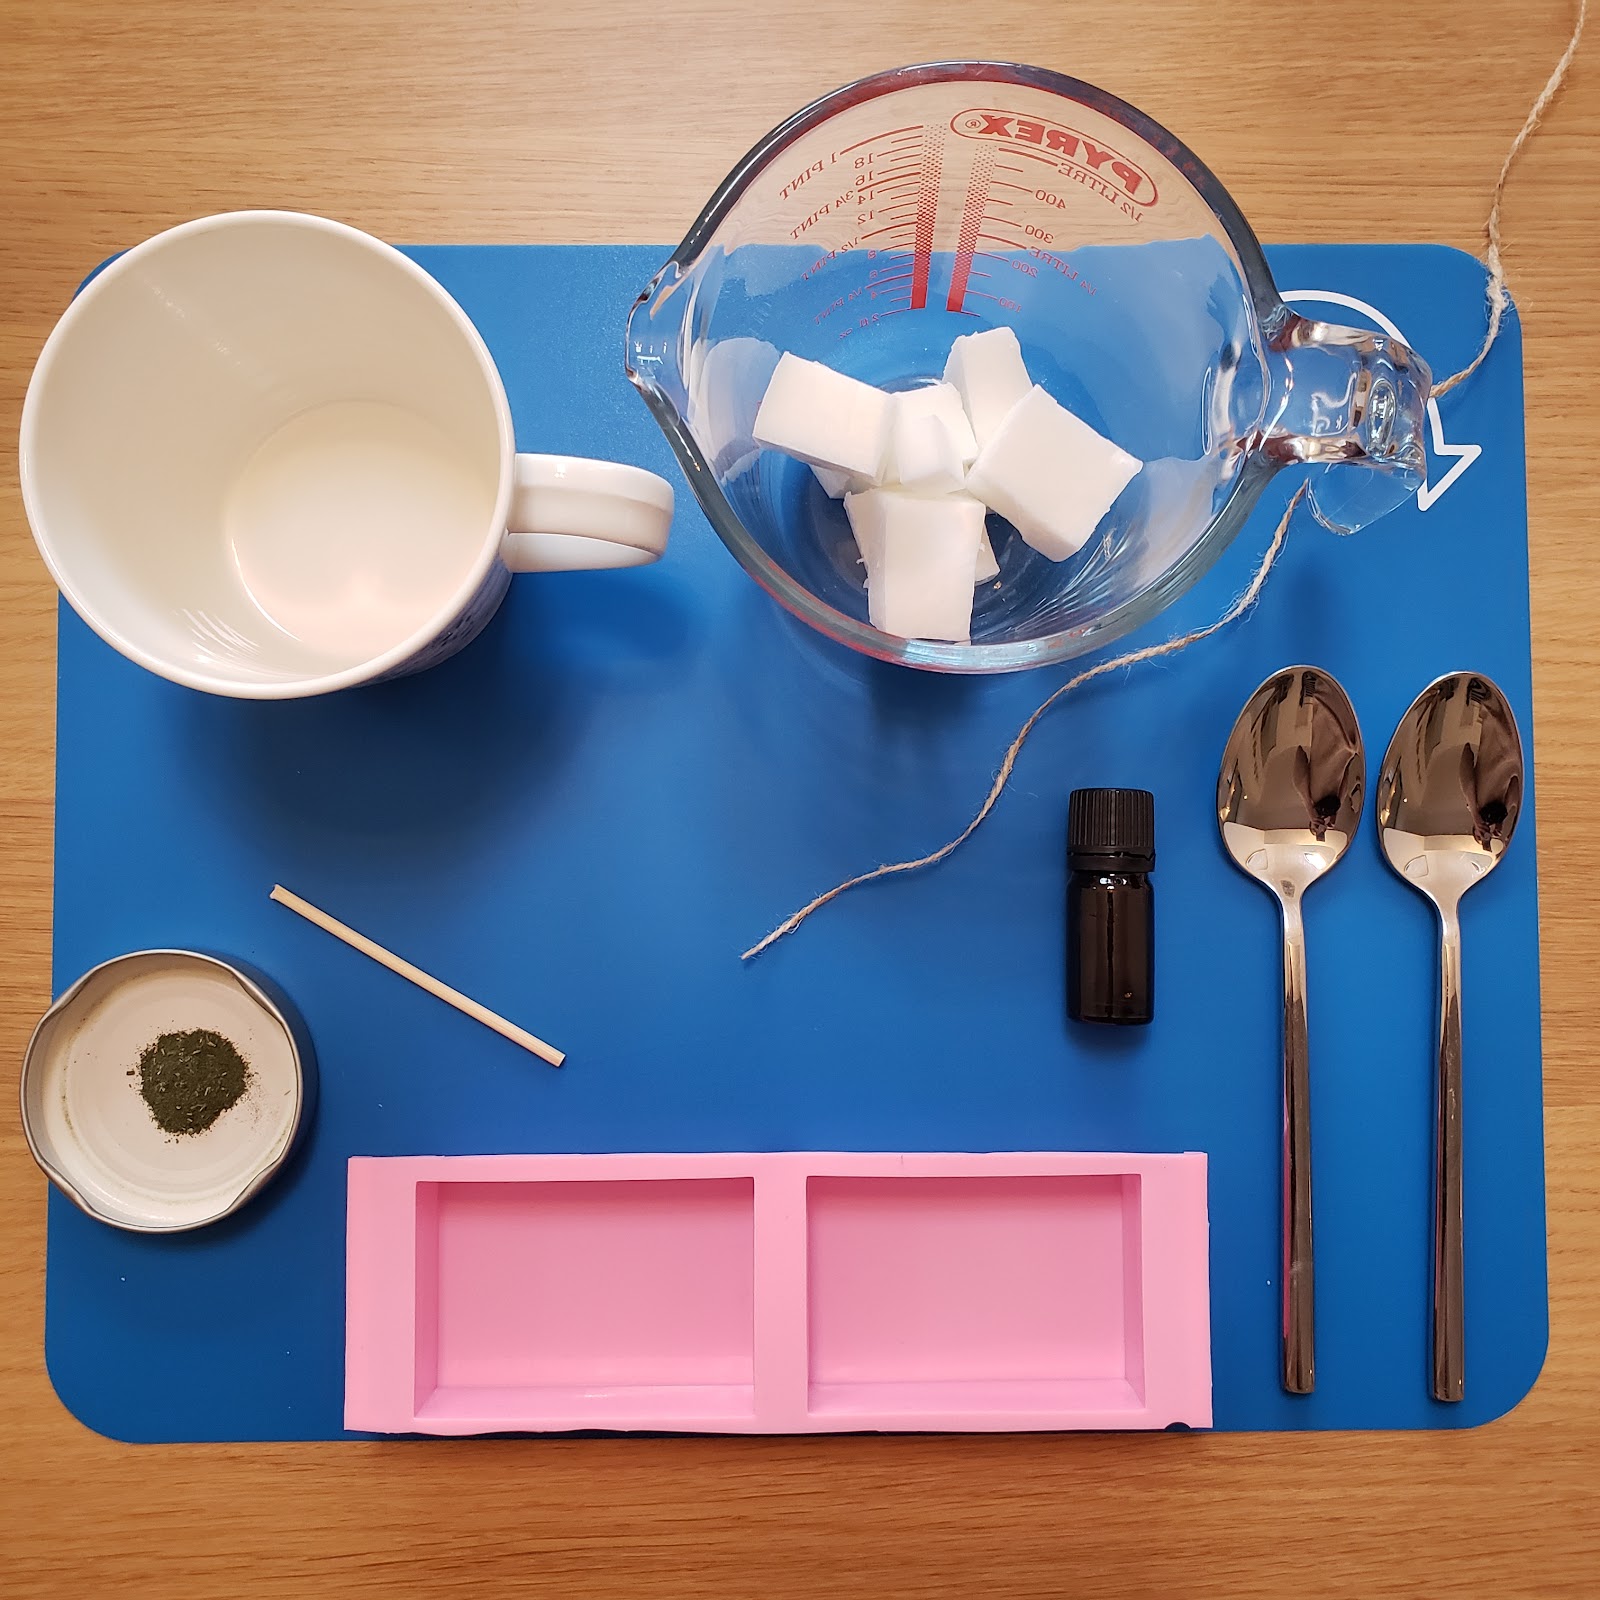 Layout all the ingredients and equipment of your soap-making kit on a safe & clean working surface